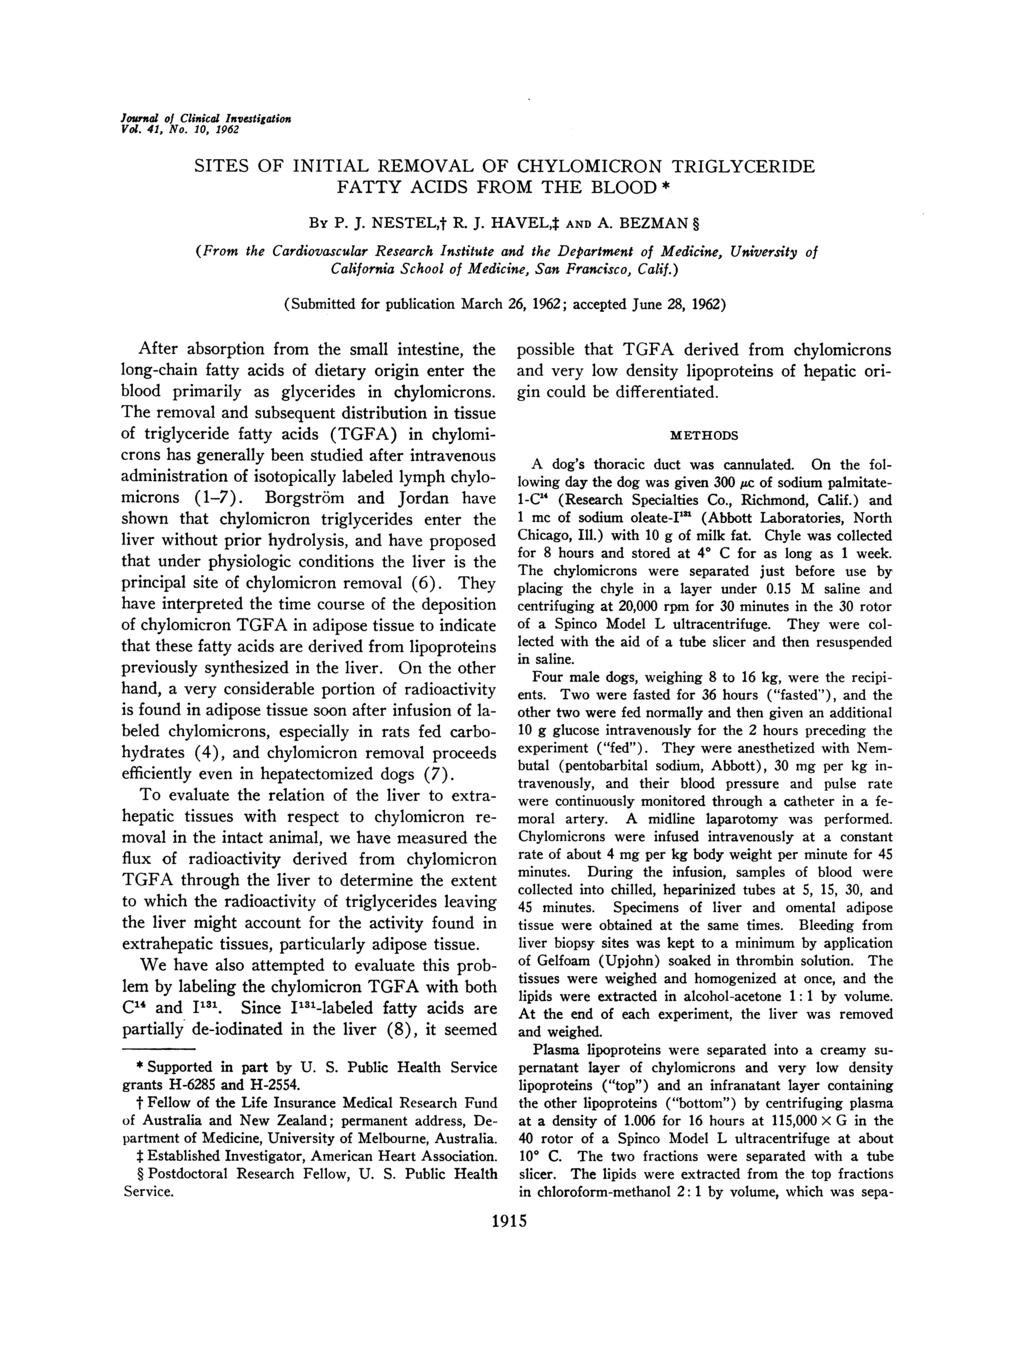 Journal of Clinical Investigation Vol. 41, No. 10, 1962 SITES OF INITIAL REMOVAL OF CHYLOMICRON TRIGLYCERIDE FATTY ACIDS FROM THE BLOOD * BY P. J. NESTEL,t R. J. HAVEL,4 AND A.